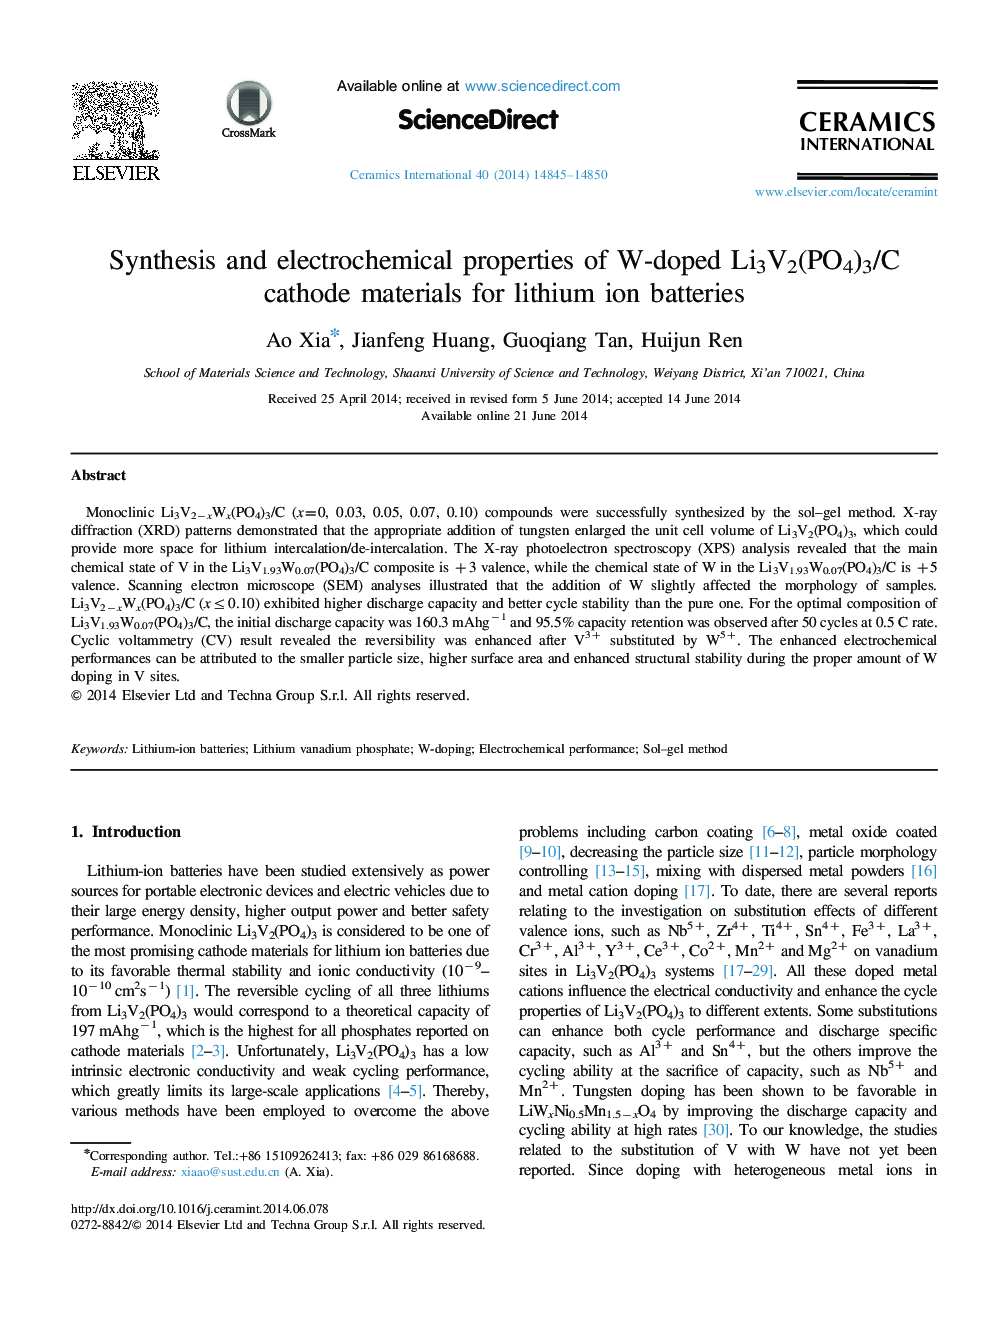 Synthesis and electrochemical properties of W-doped Li3V2(PO4)3/C cathode materials for lithium ion batteries